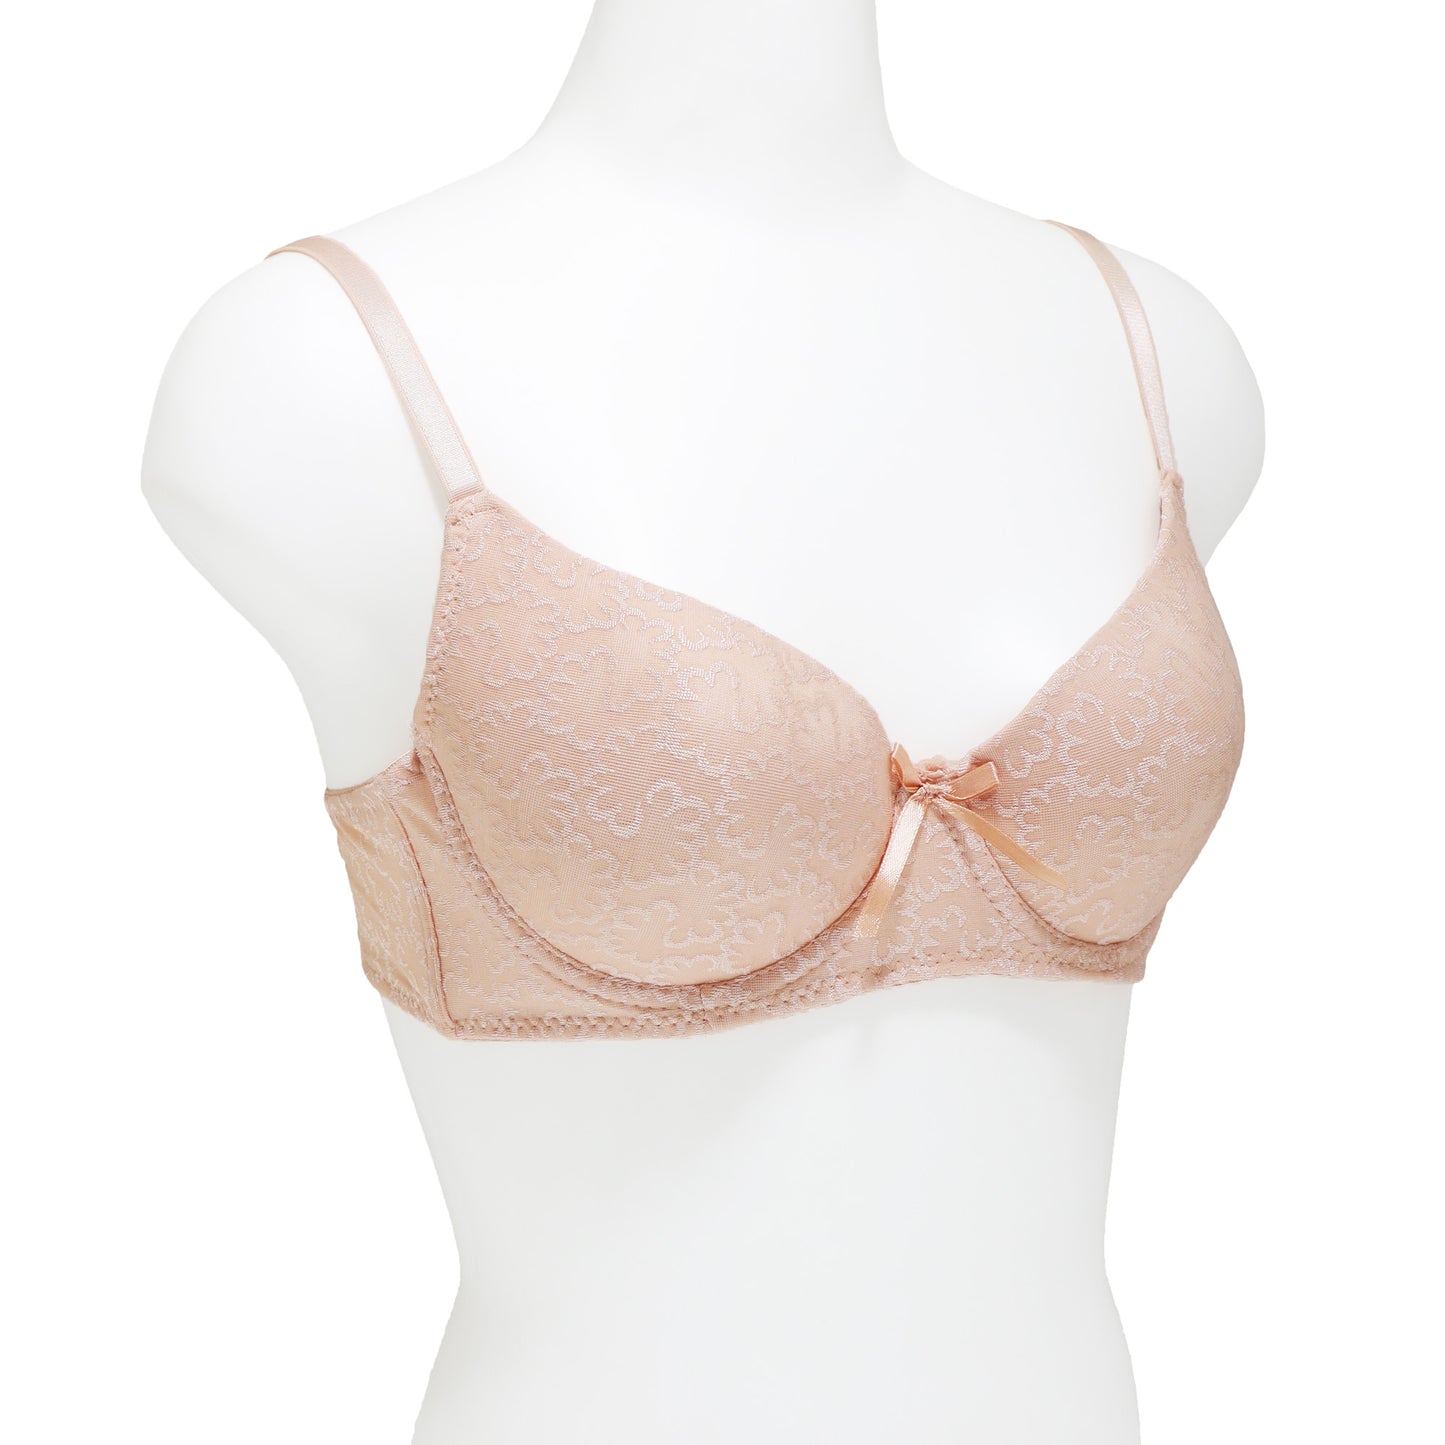 Wired Floral Lace Embroidered A-Cup Bras (6-Pack)